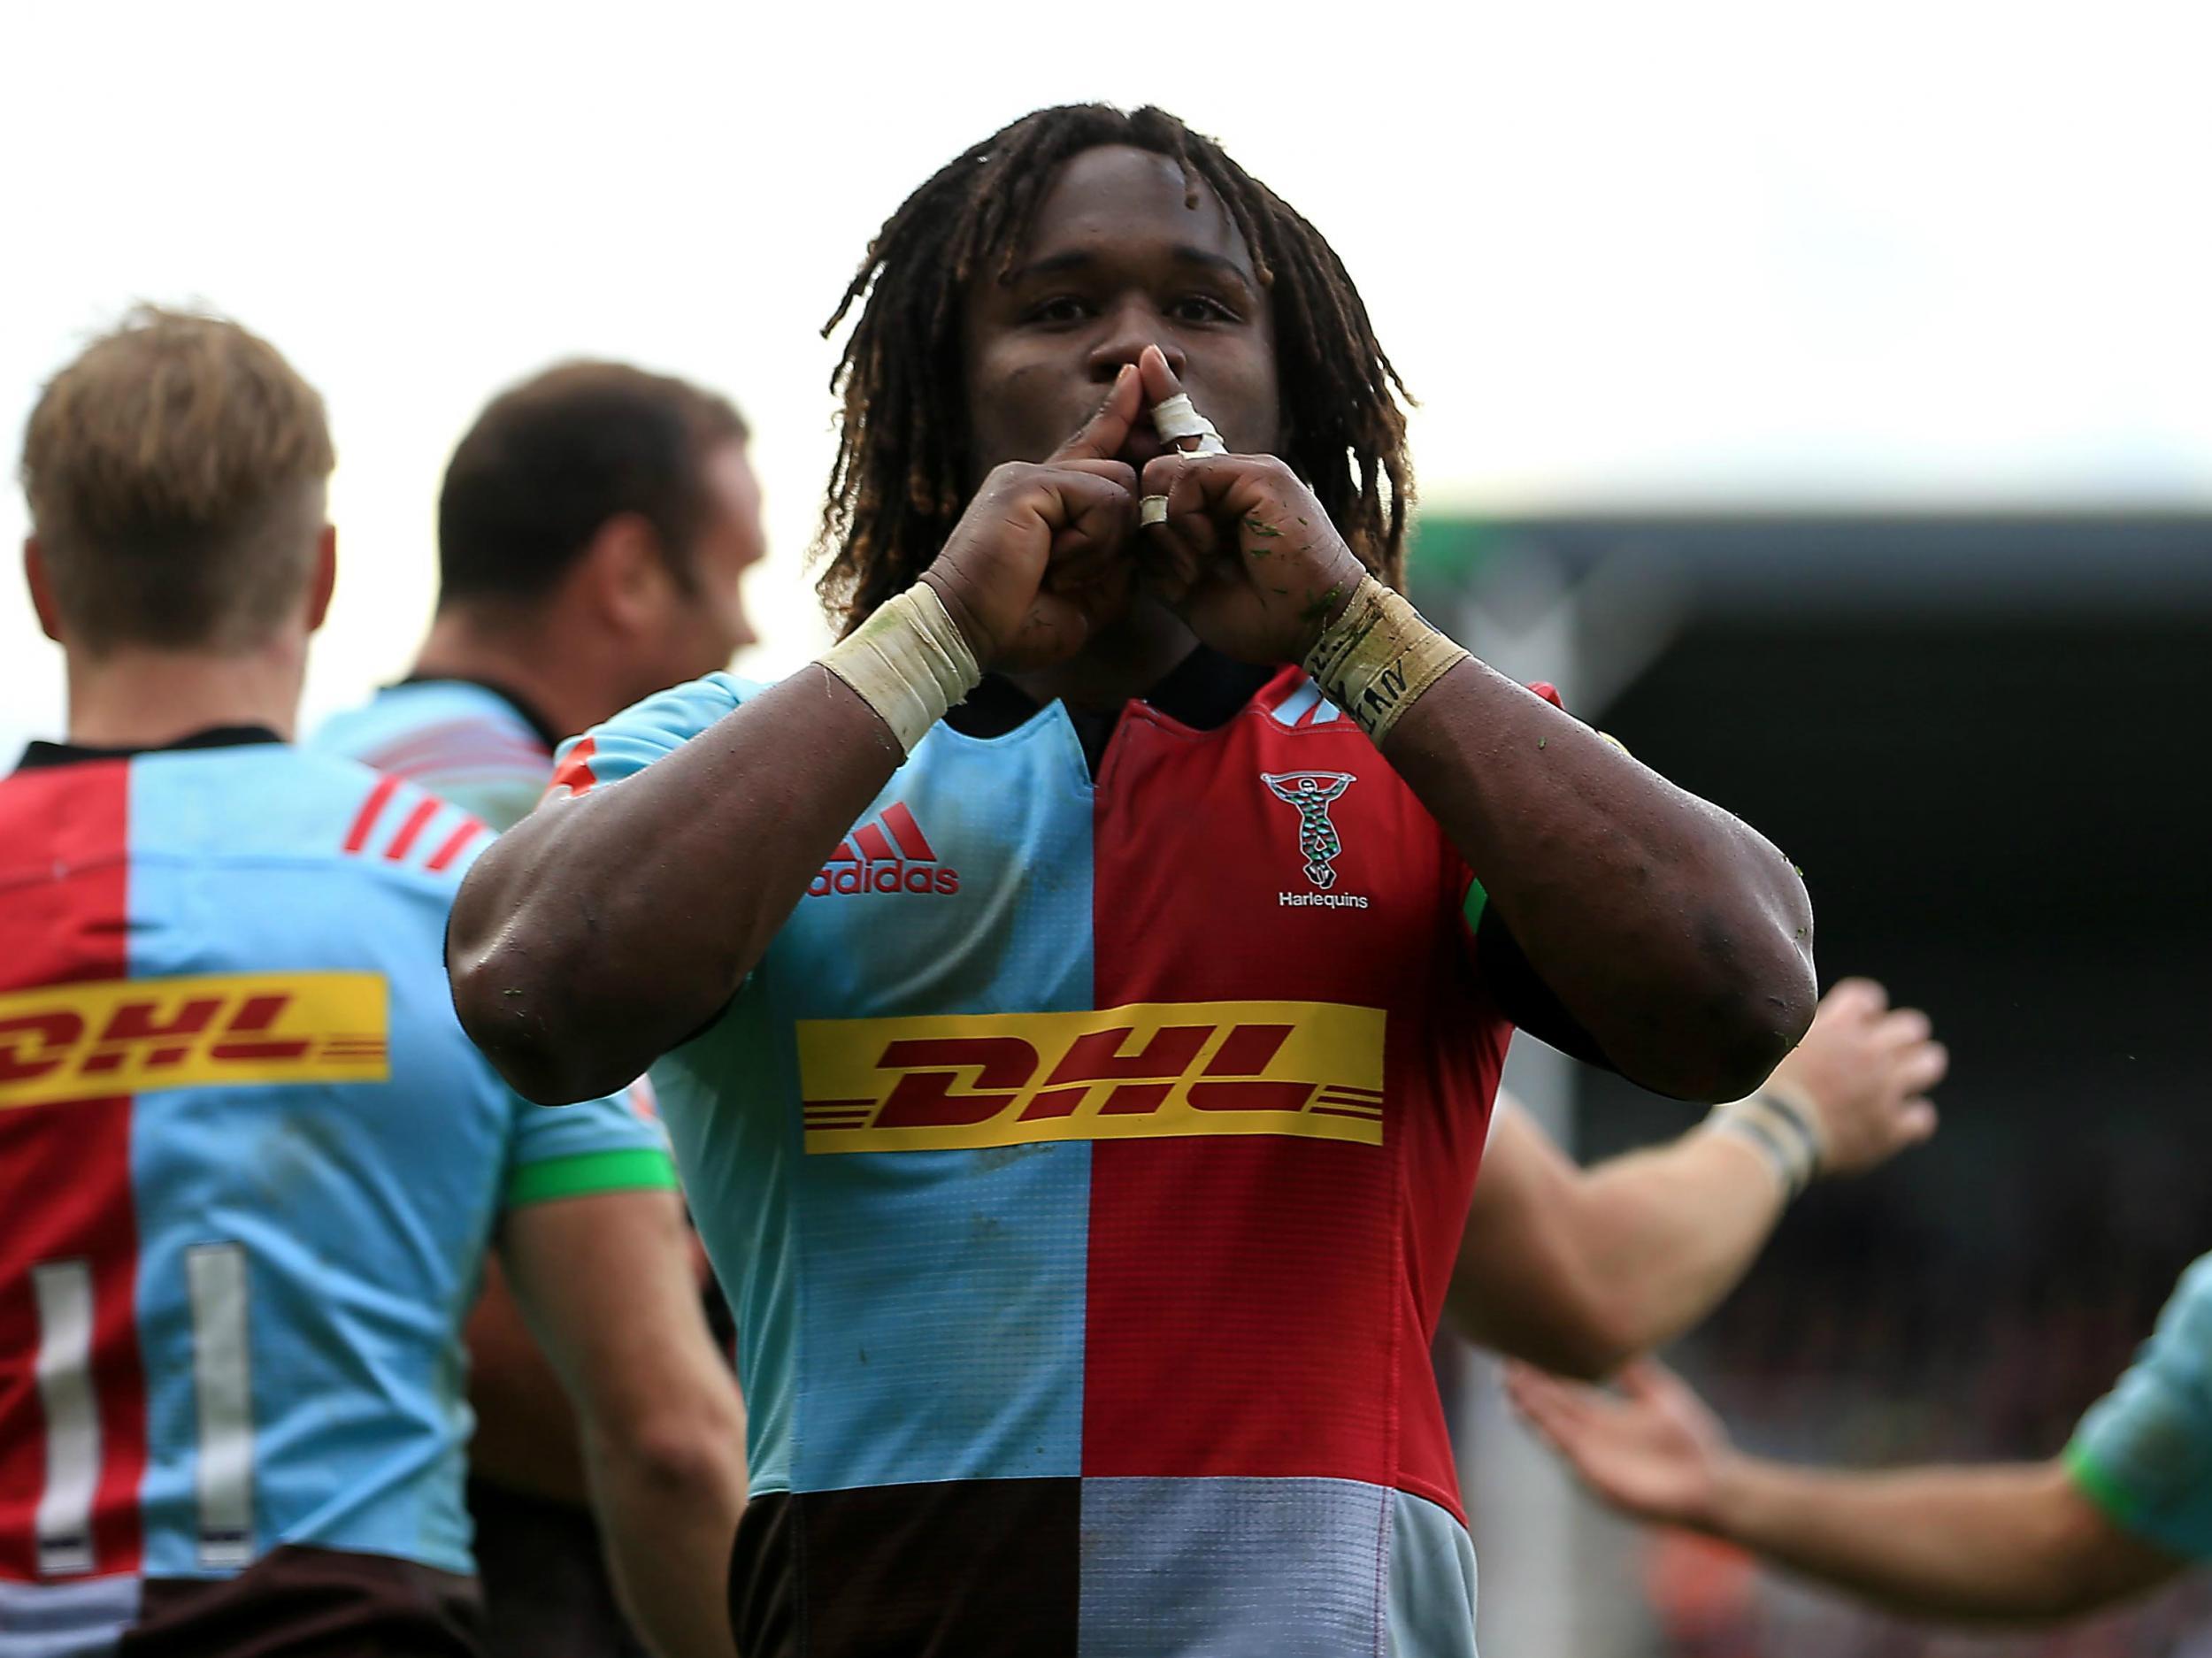 Mrland Yarde has agreed to join Sale Sharks on a three-year deal with immediate effect